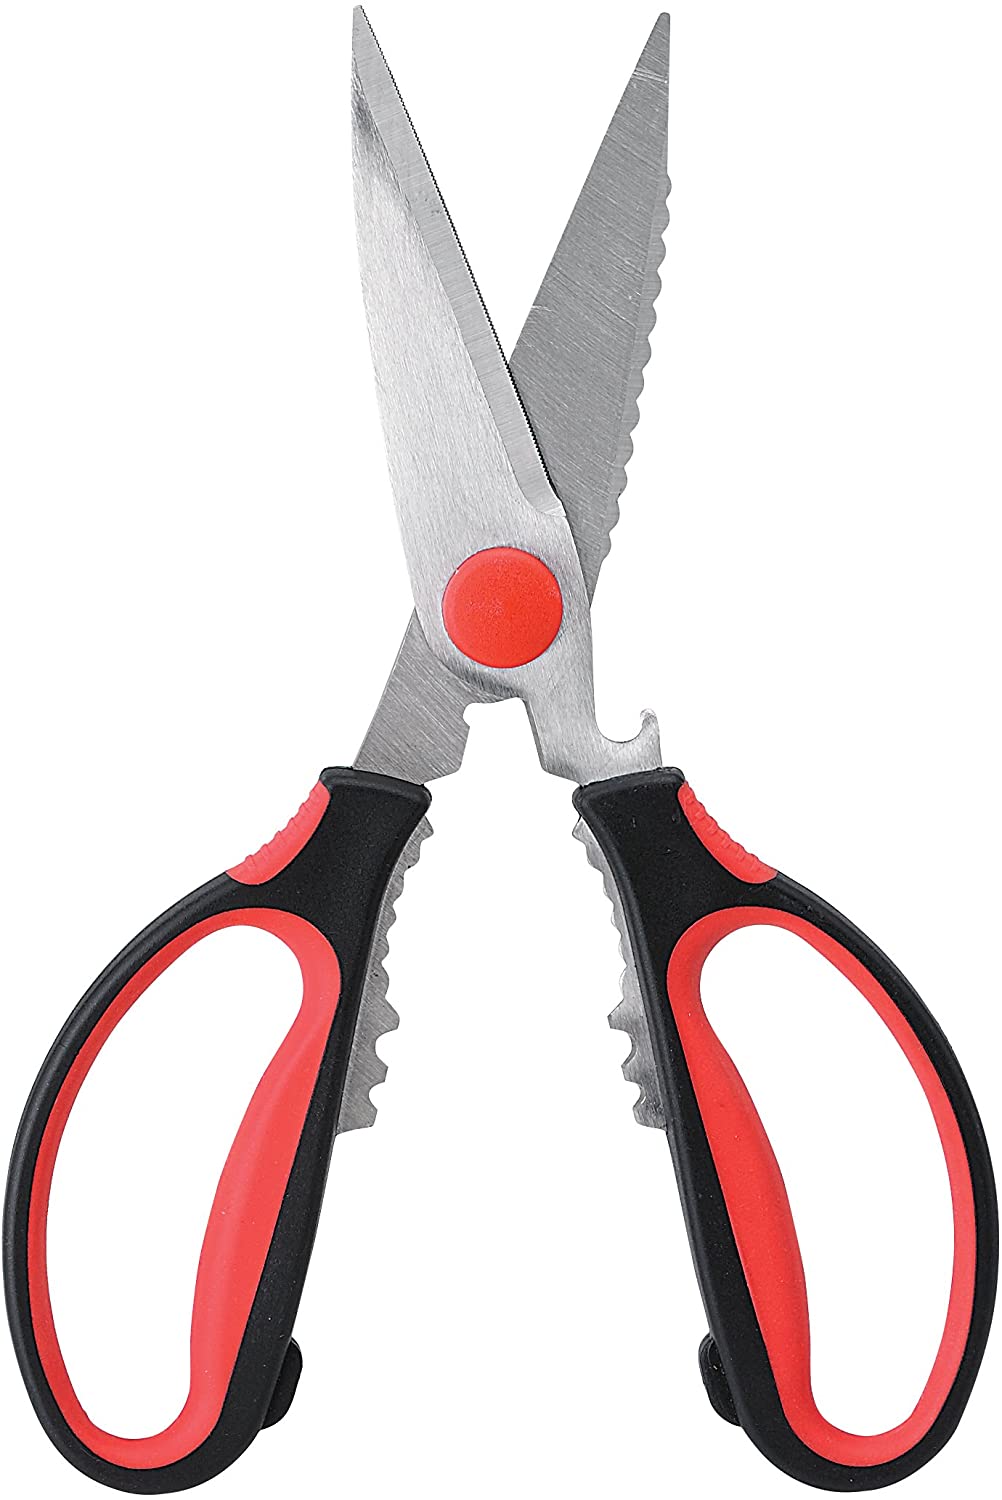  OXO Good Grips Professional Poultry Shears: Cutlery